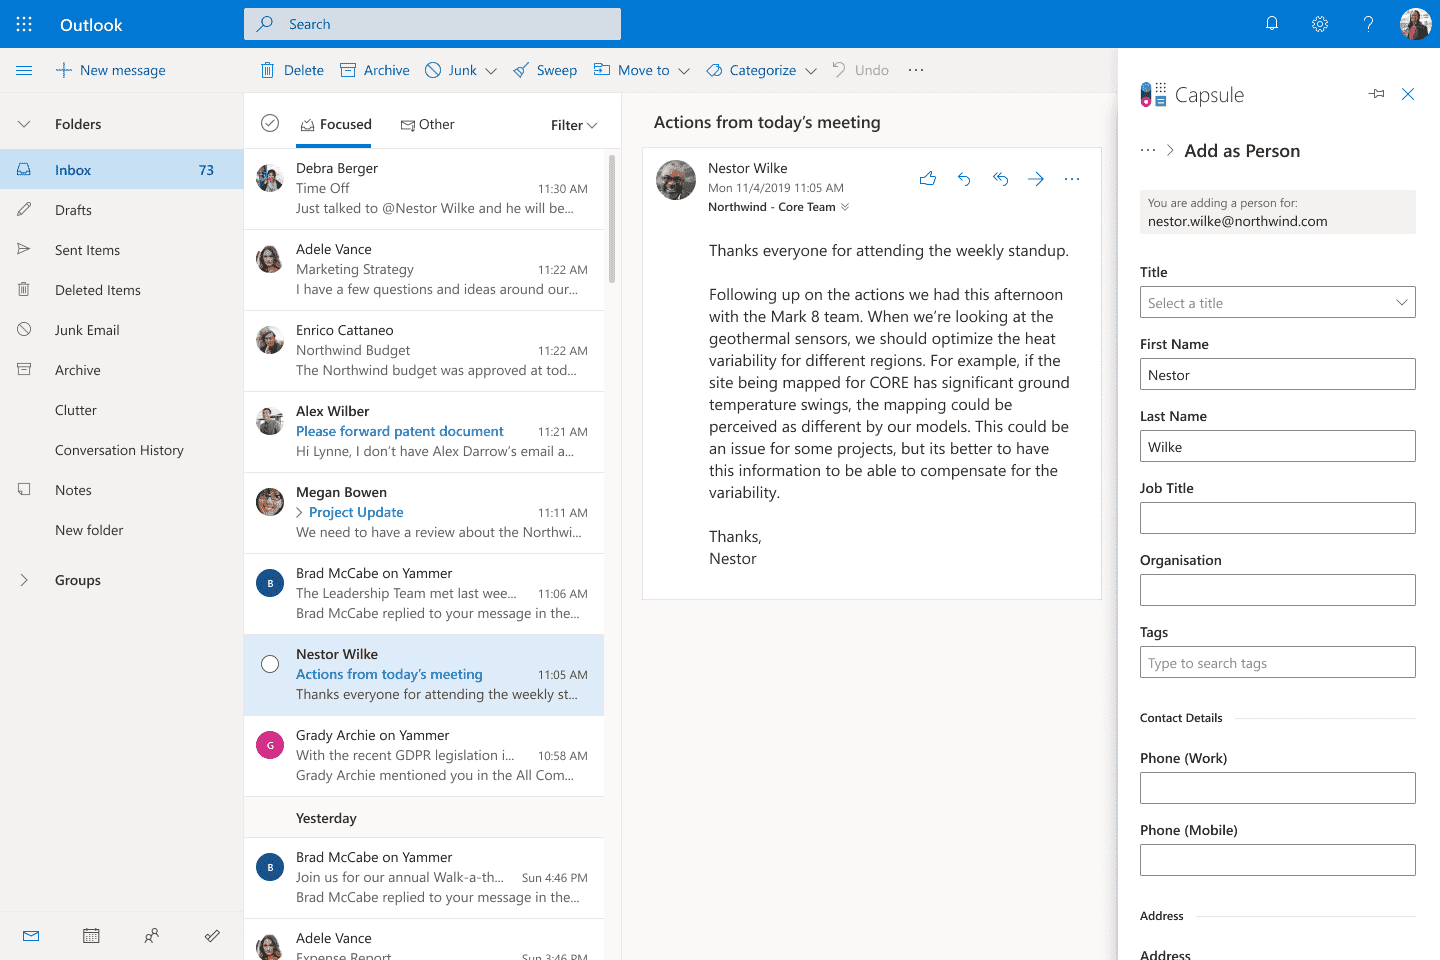 Capsule sidebar in Outlook with form to fill in contact details